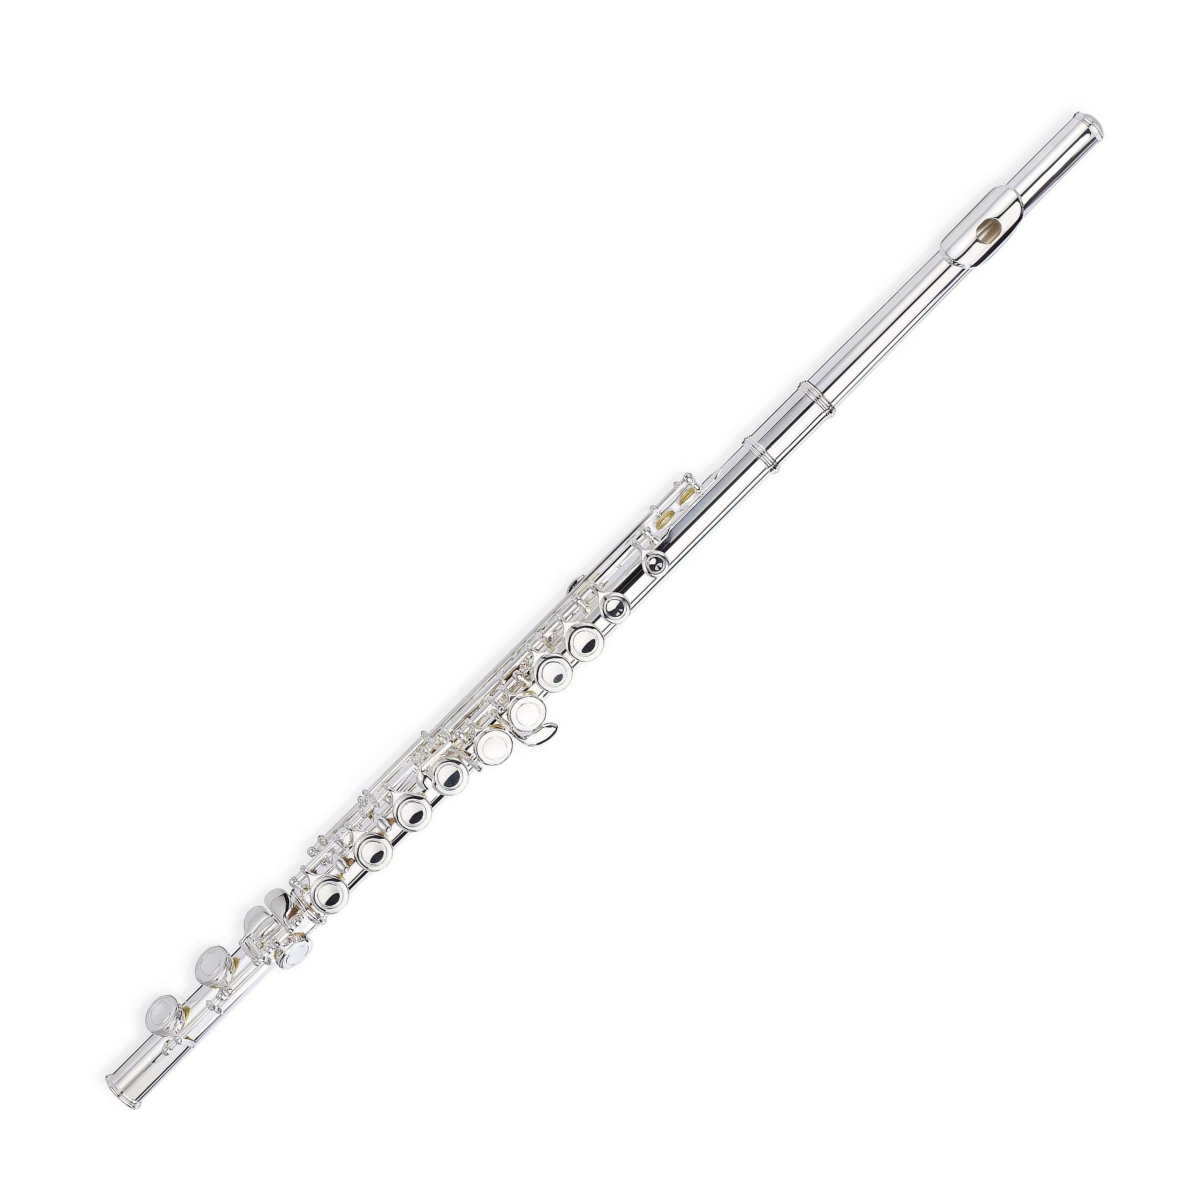 Ena Flute (for public examinations) Flute in C, can be equipped with a U-shaped mouthpiece for children